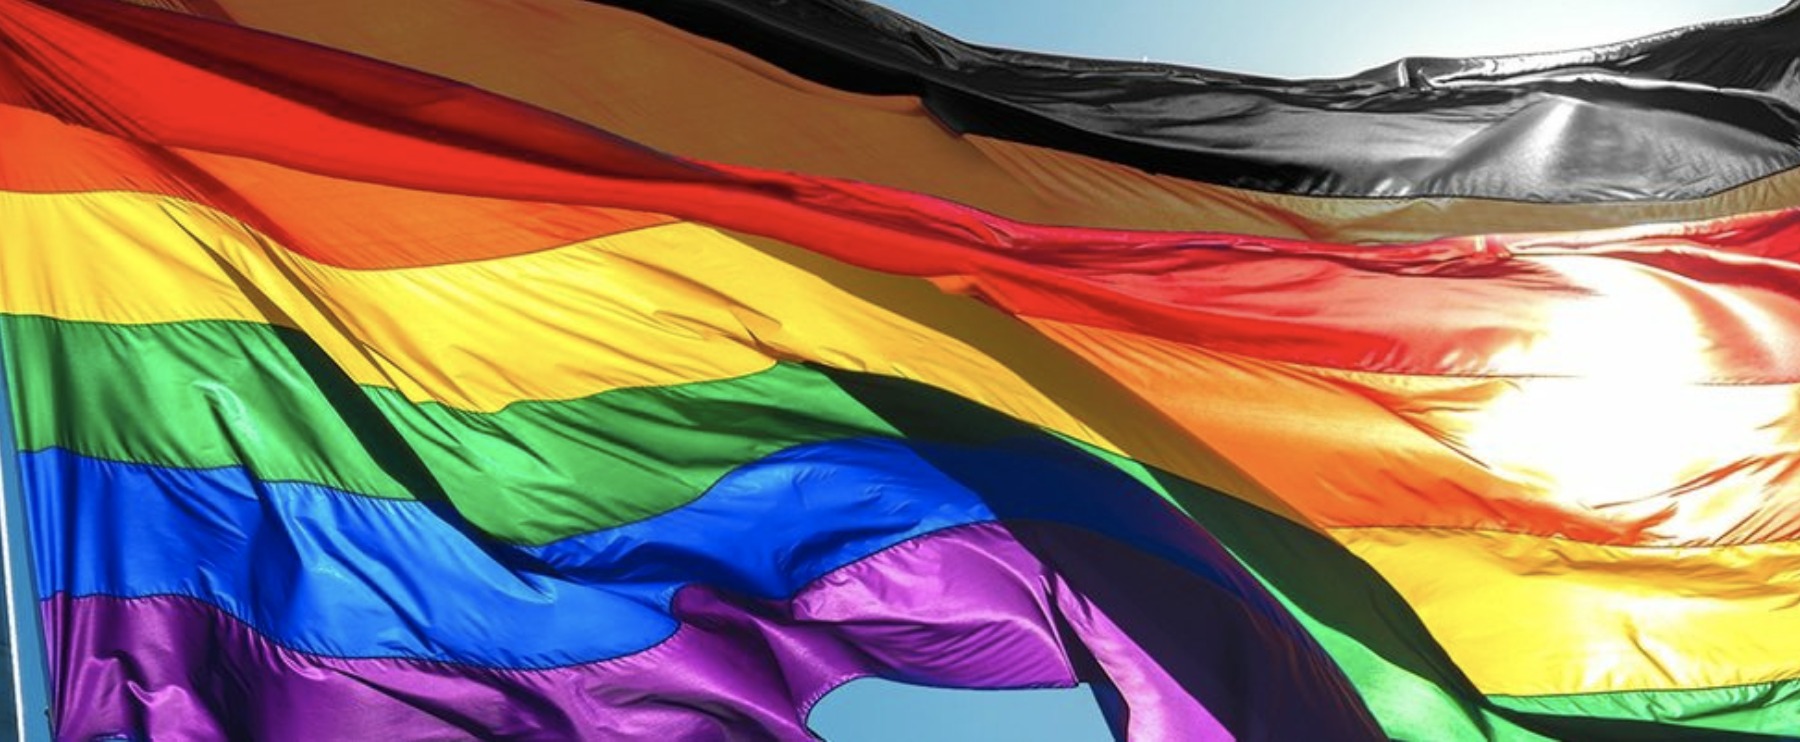 Push to add black and brown stripes to rainbow flag sparks debate